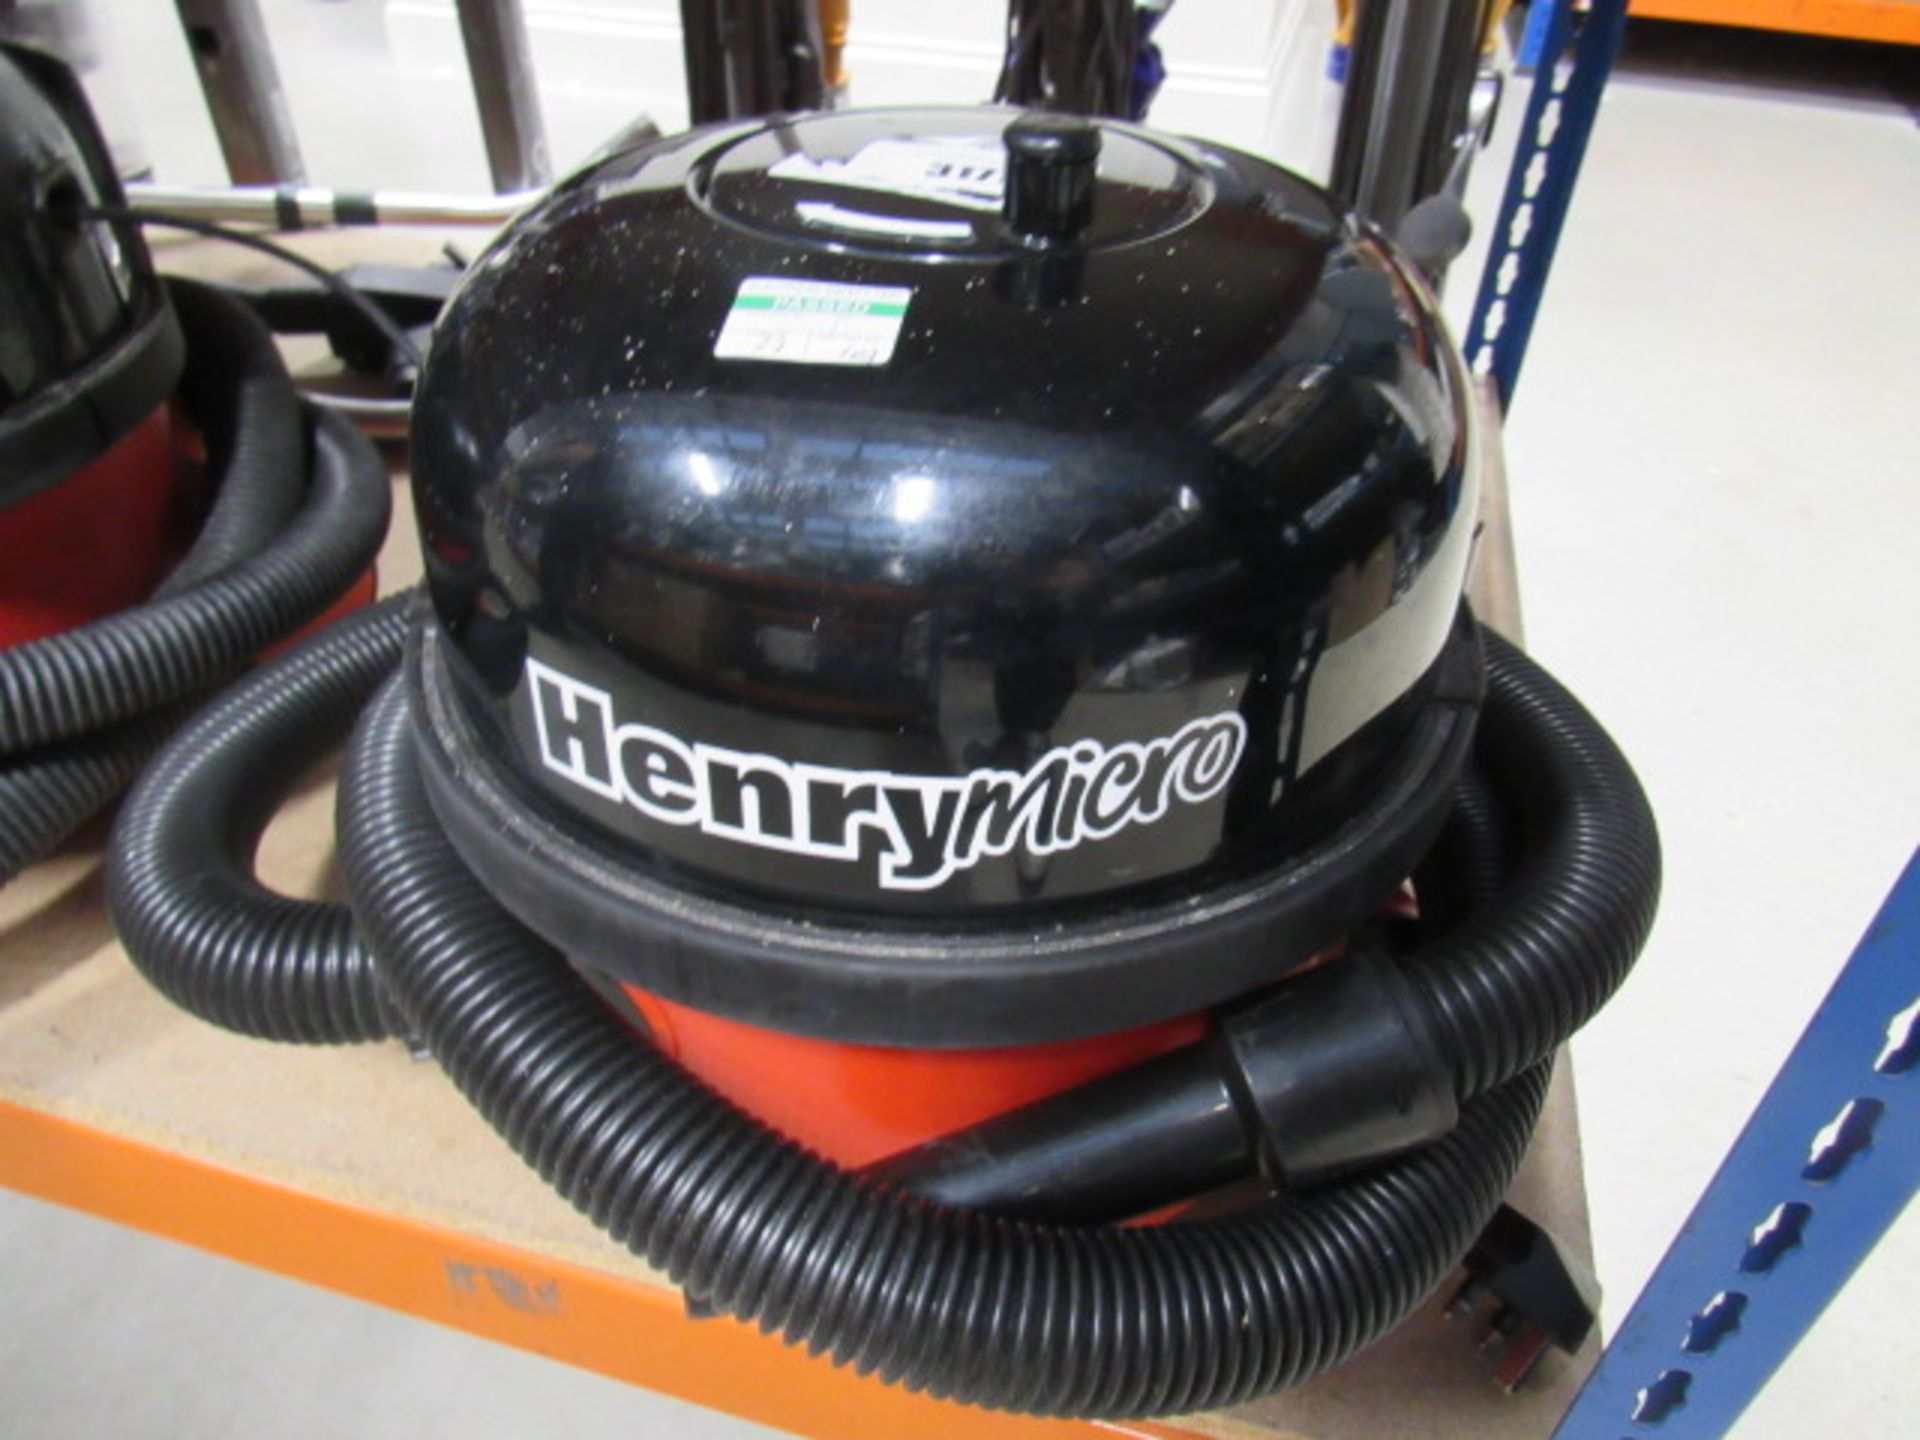 Henry micro vacuum cleaner with pole